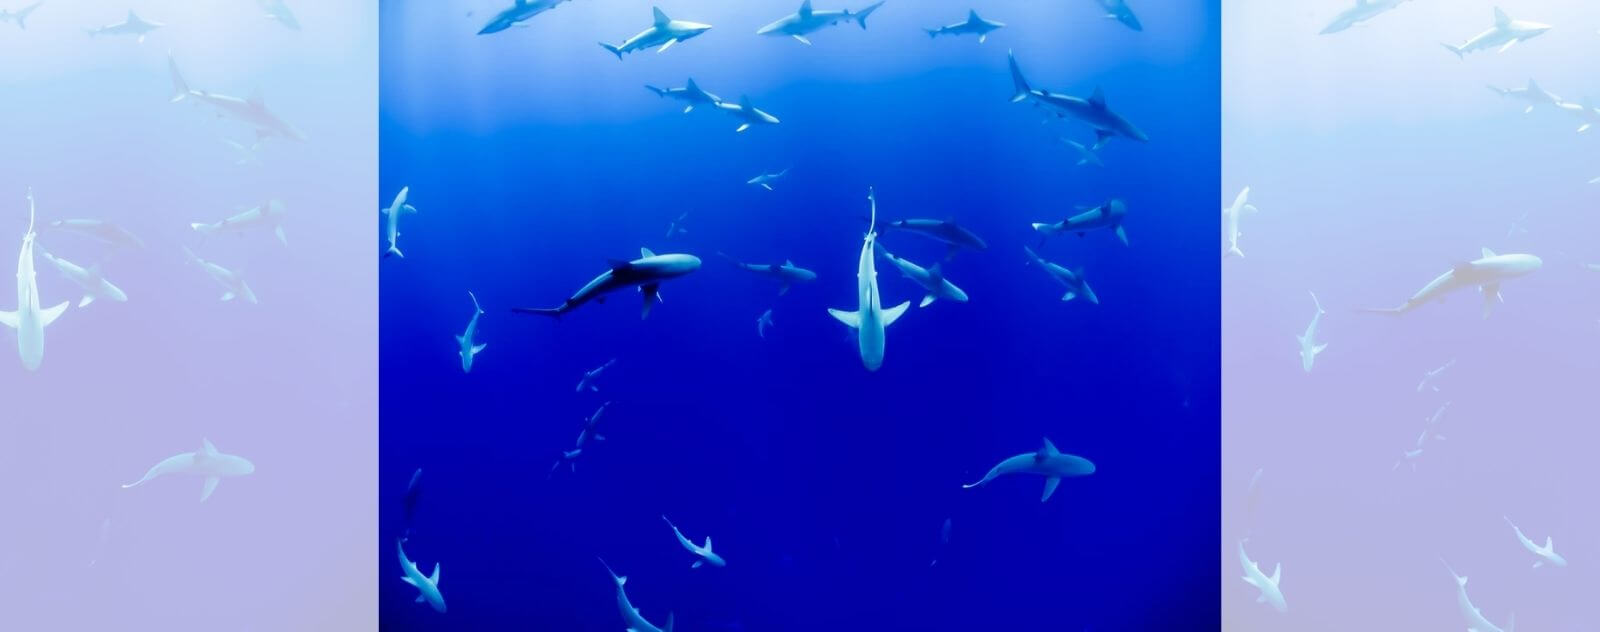 The Different Species of Sharks - Group of Several Sharks in the Ocean